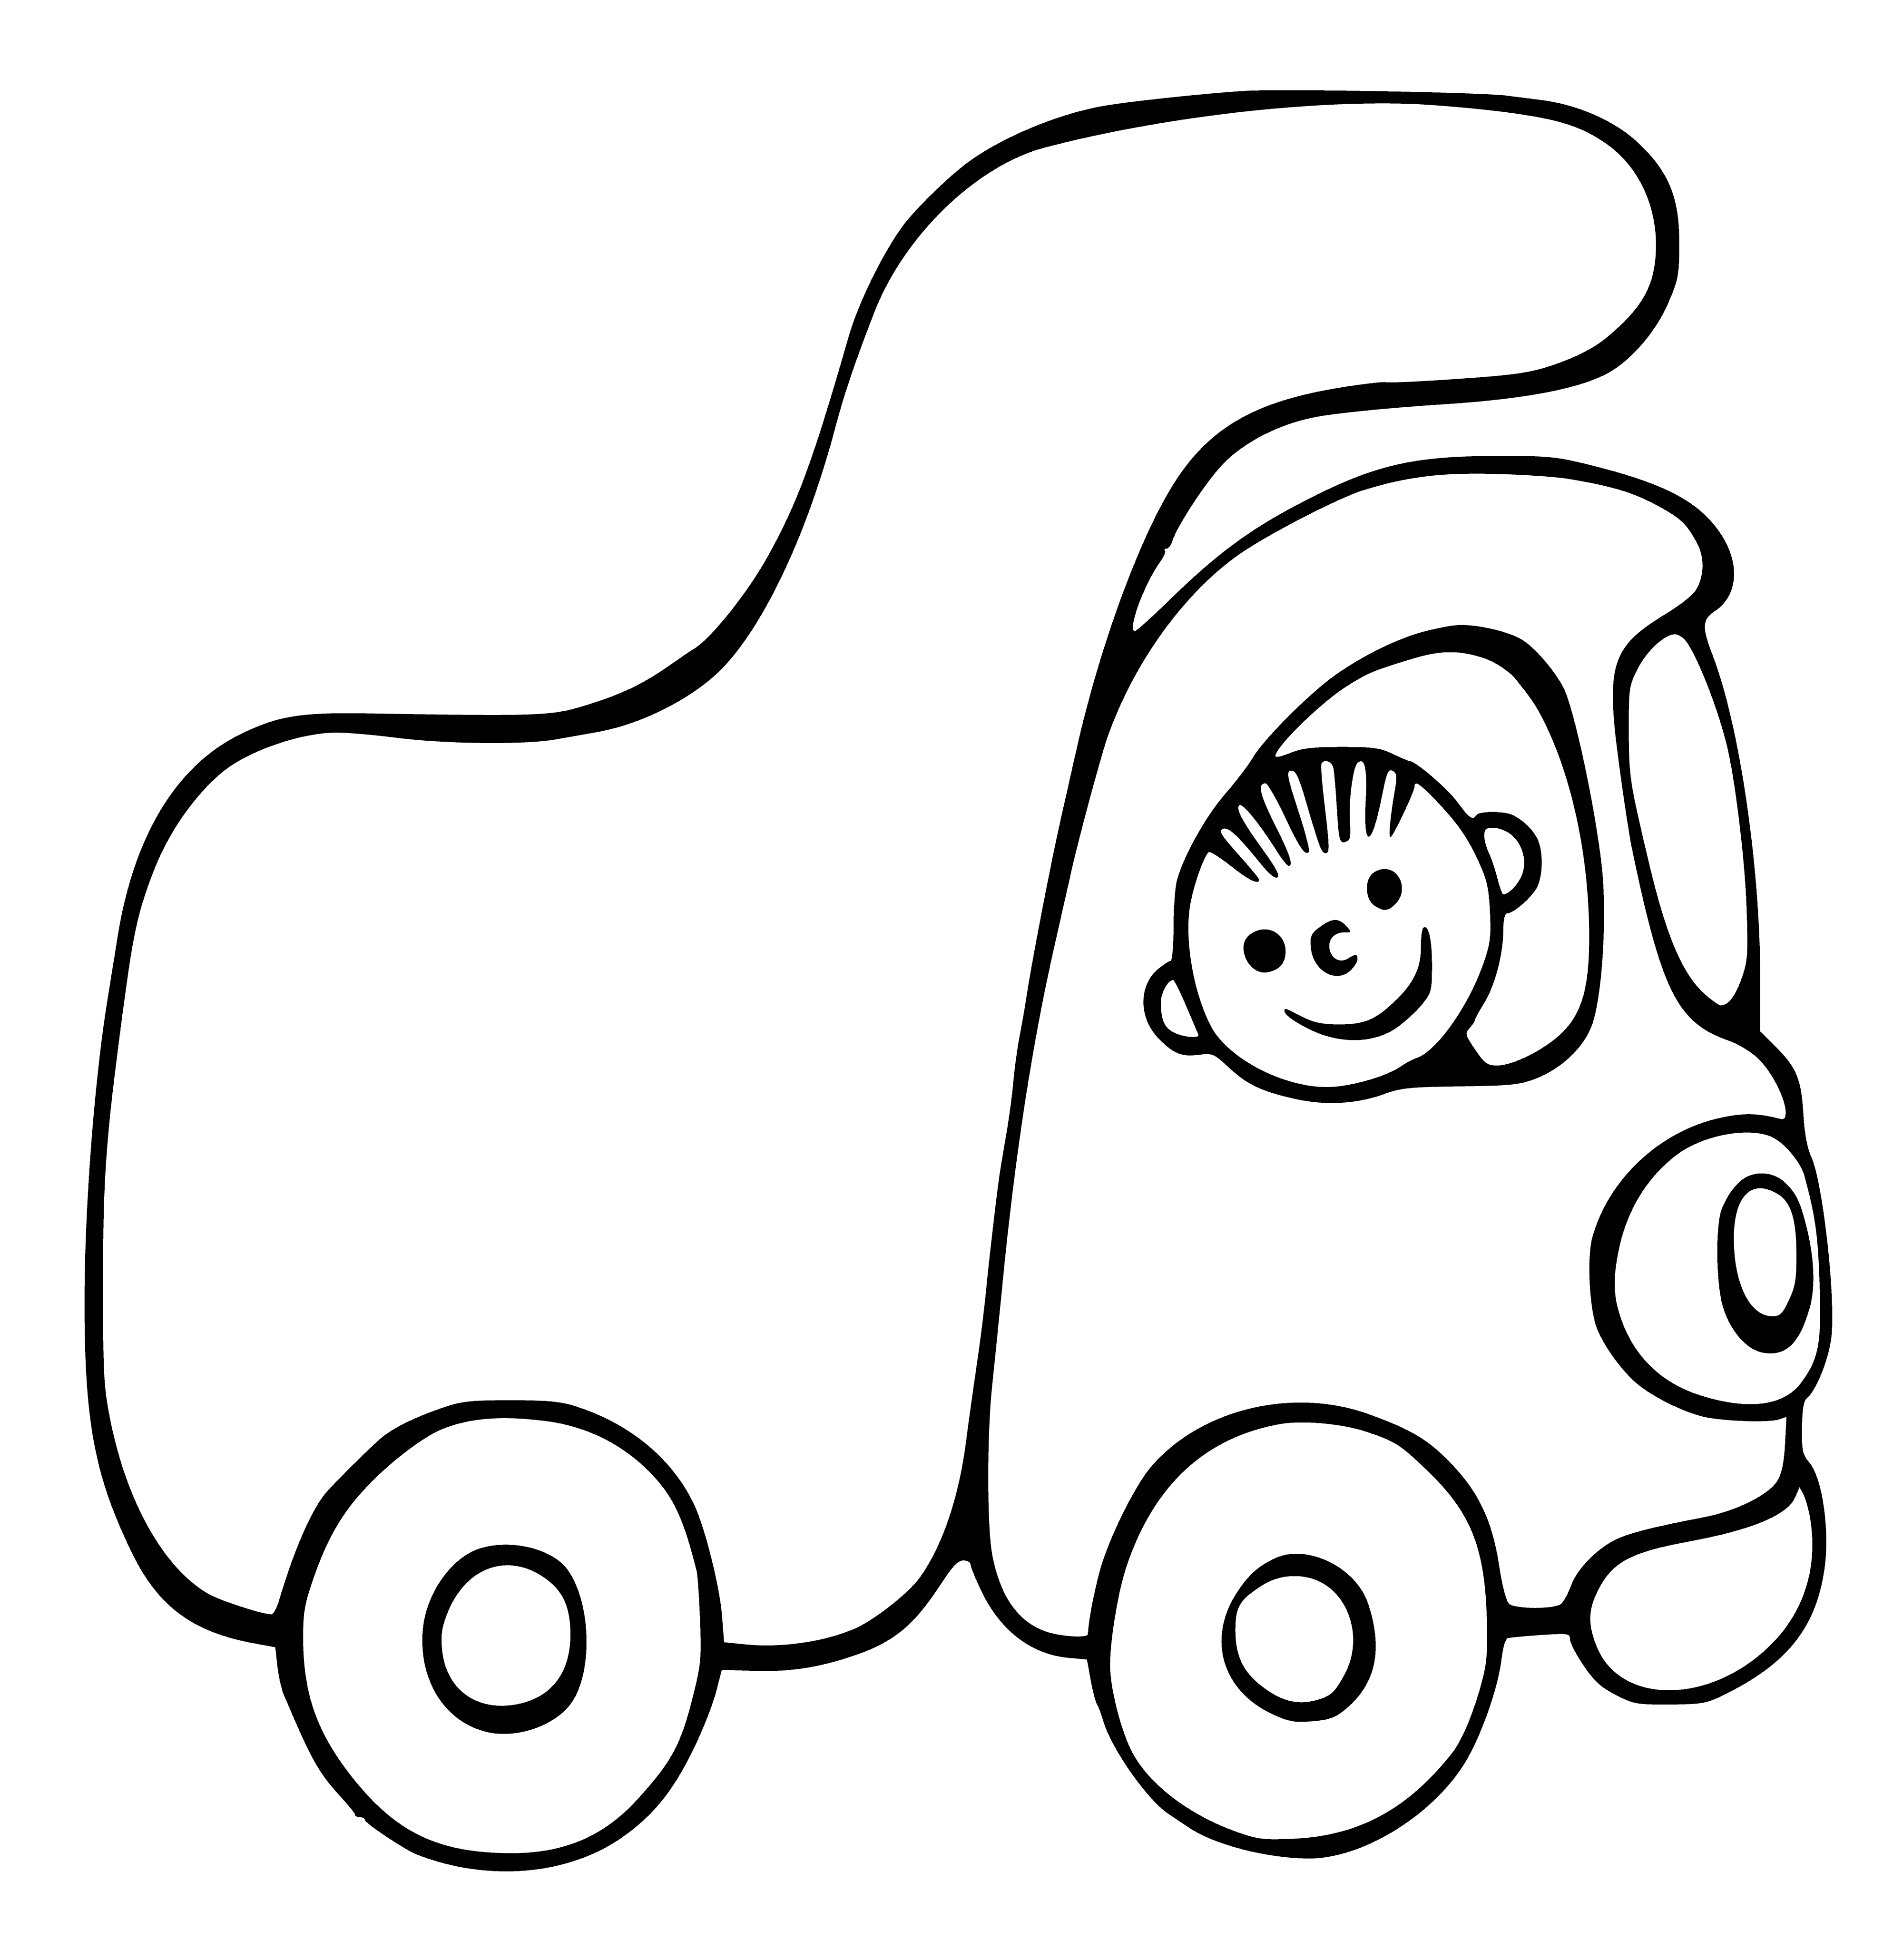 coloring page: A dump truck has a large bed for hauling materials, a door for dumping contents, and large tires/powerful engine for heavy loads.